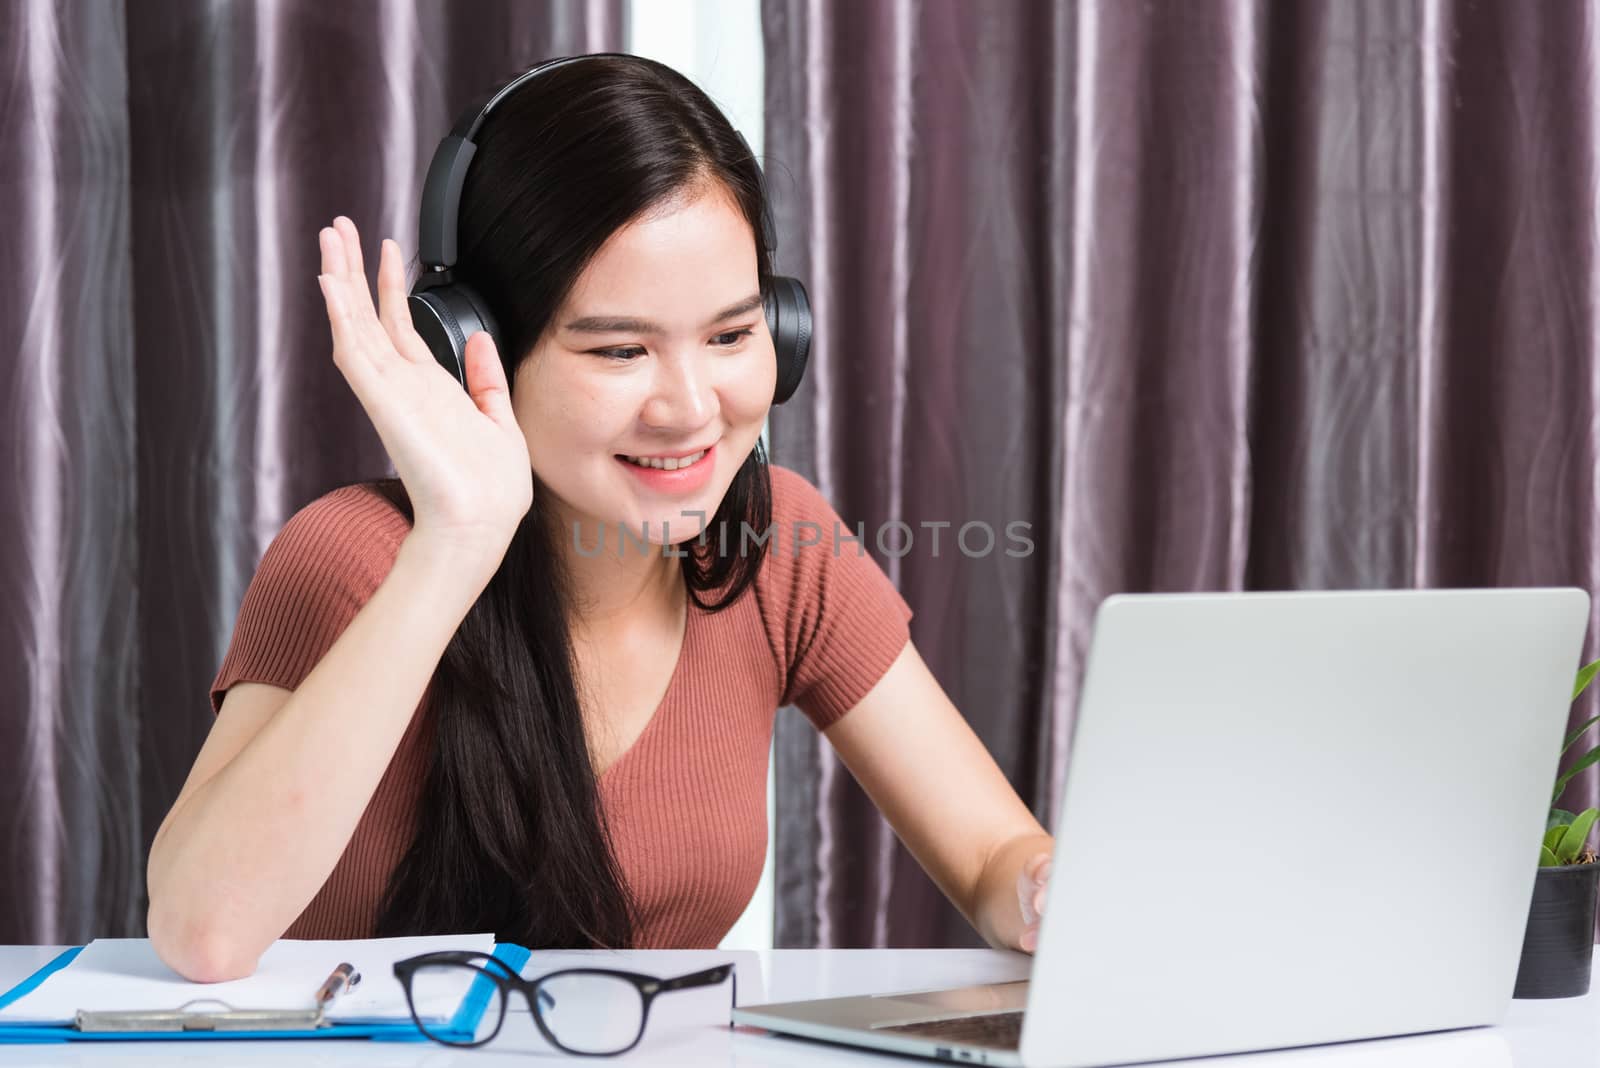 Work from home, Smiling Happy Asian business young beautiful woman sitting on desk workspace wearing headphones video call conference with laptop computer raise hand saying hi team at home office